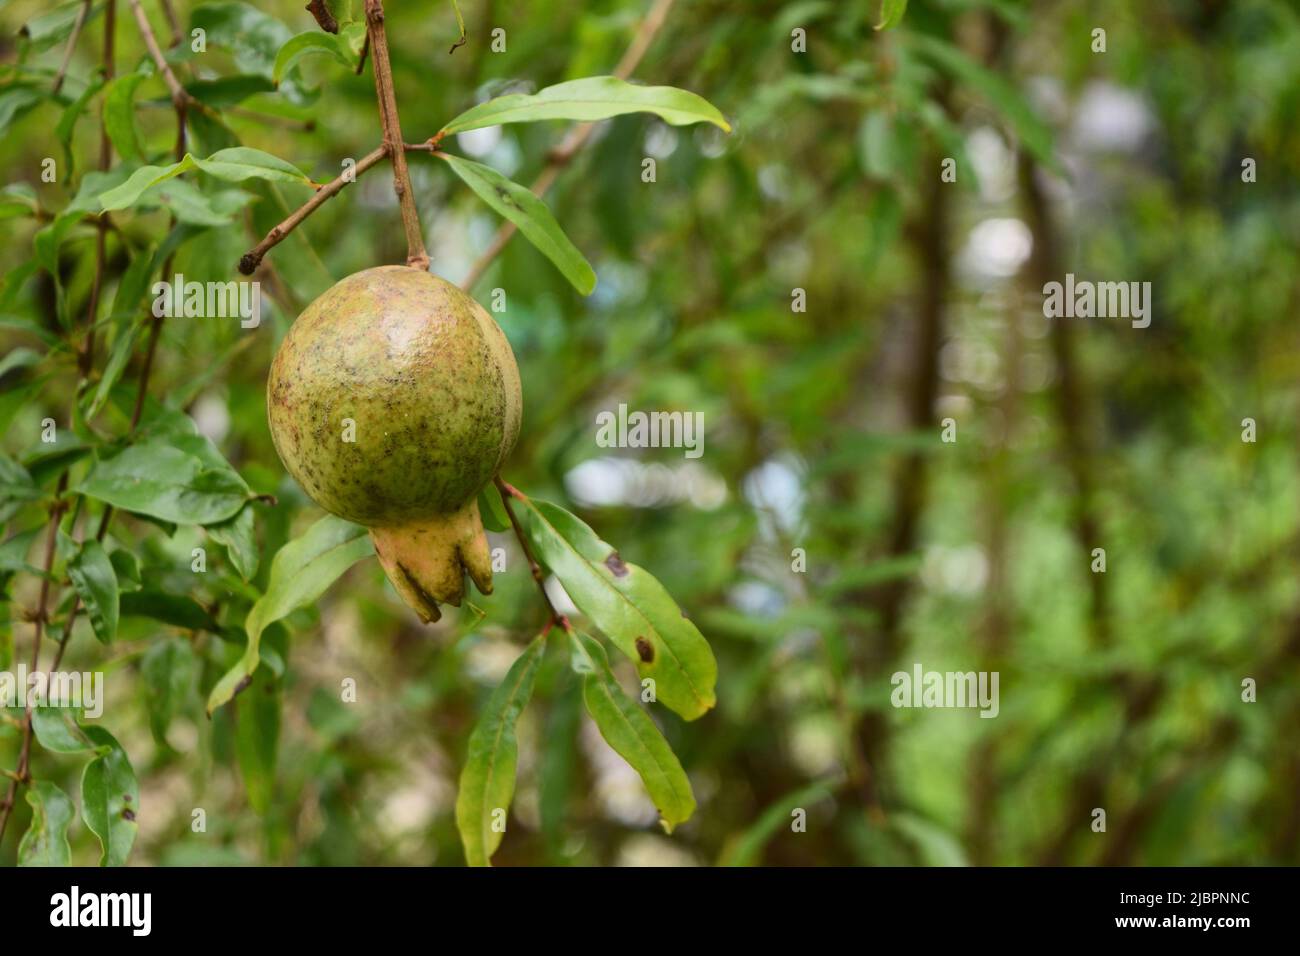 Pomegranate fruit on tree with natural green leaves in background, Thailand Stock Photo